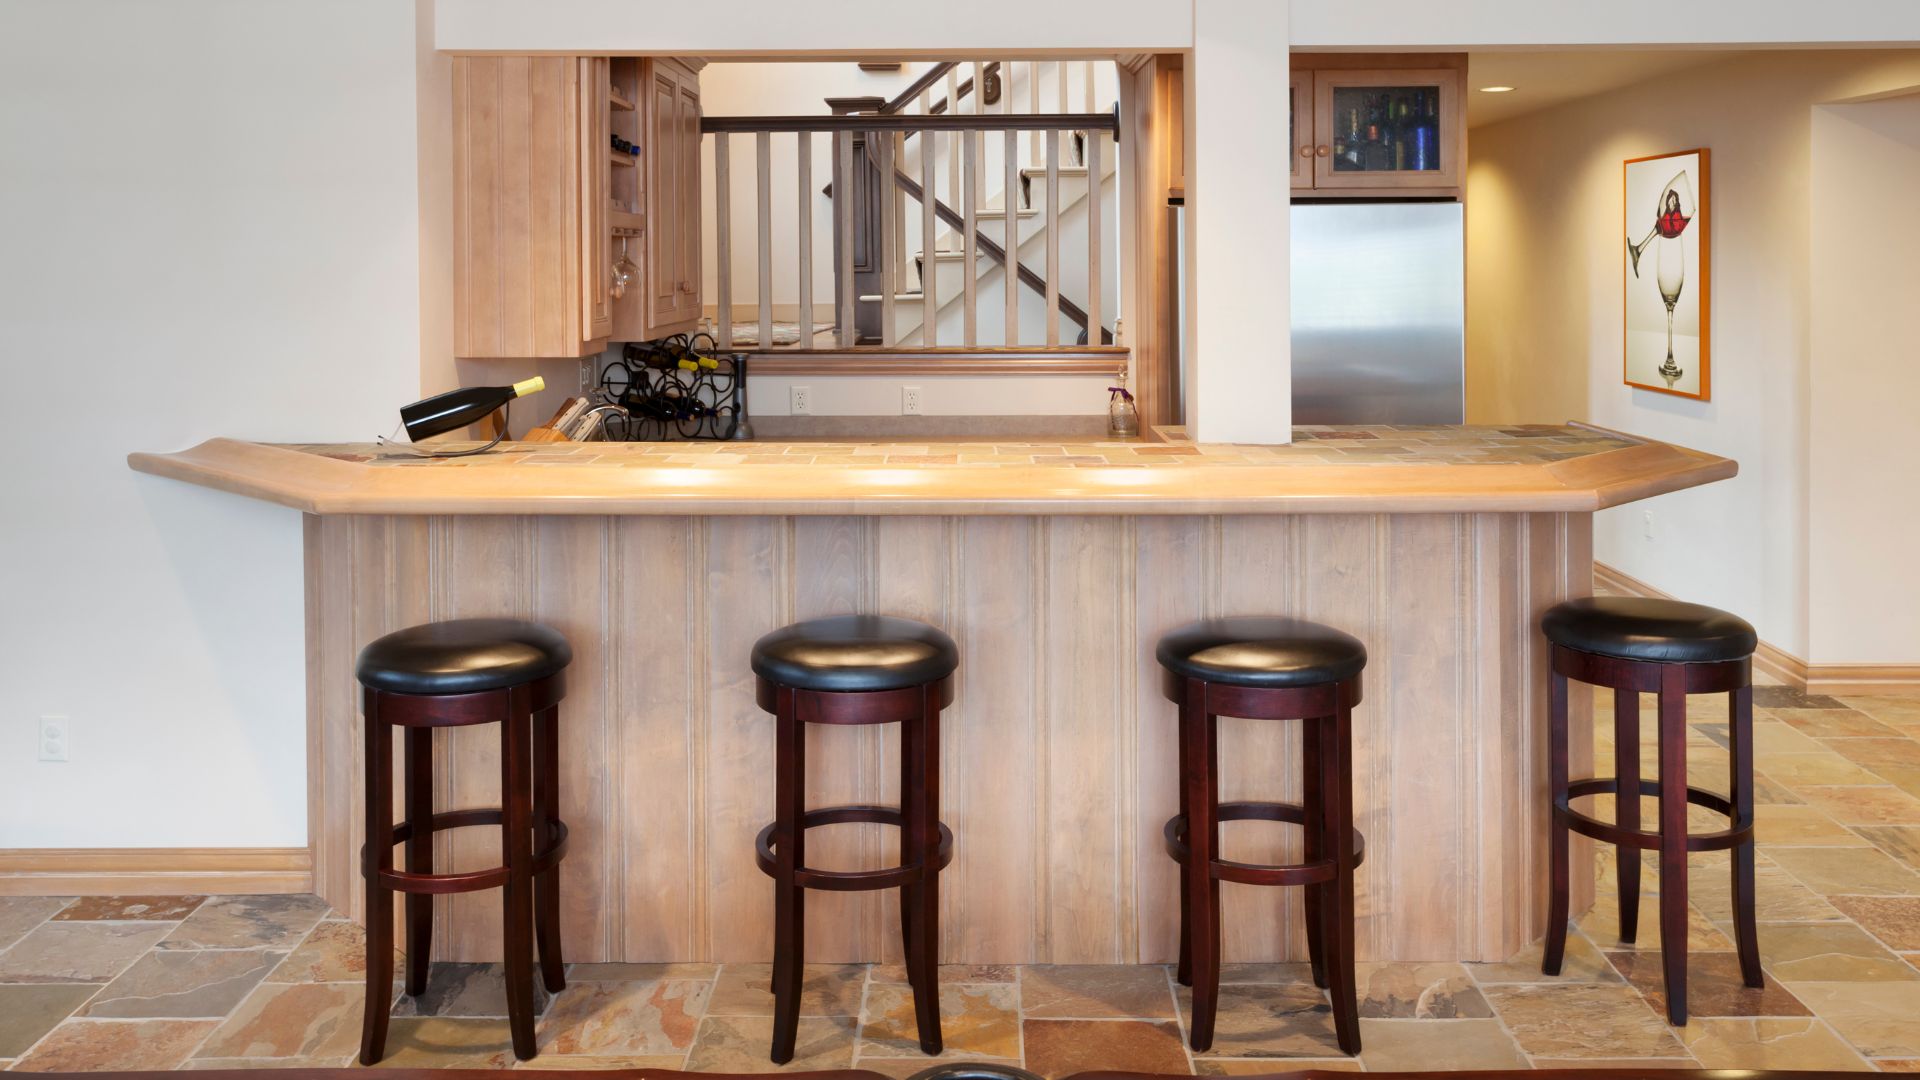 Basement bar beside stairs in light wood cabinet and cream countertop